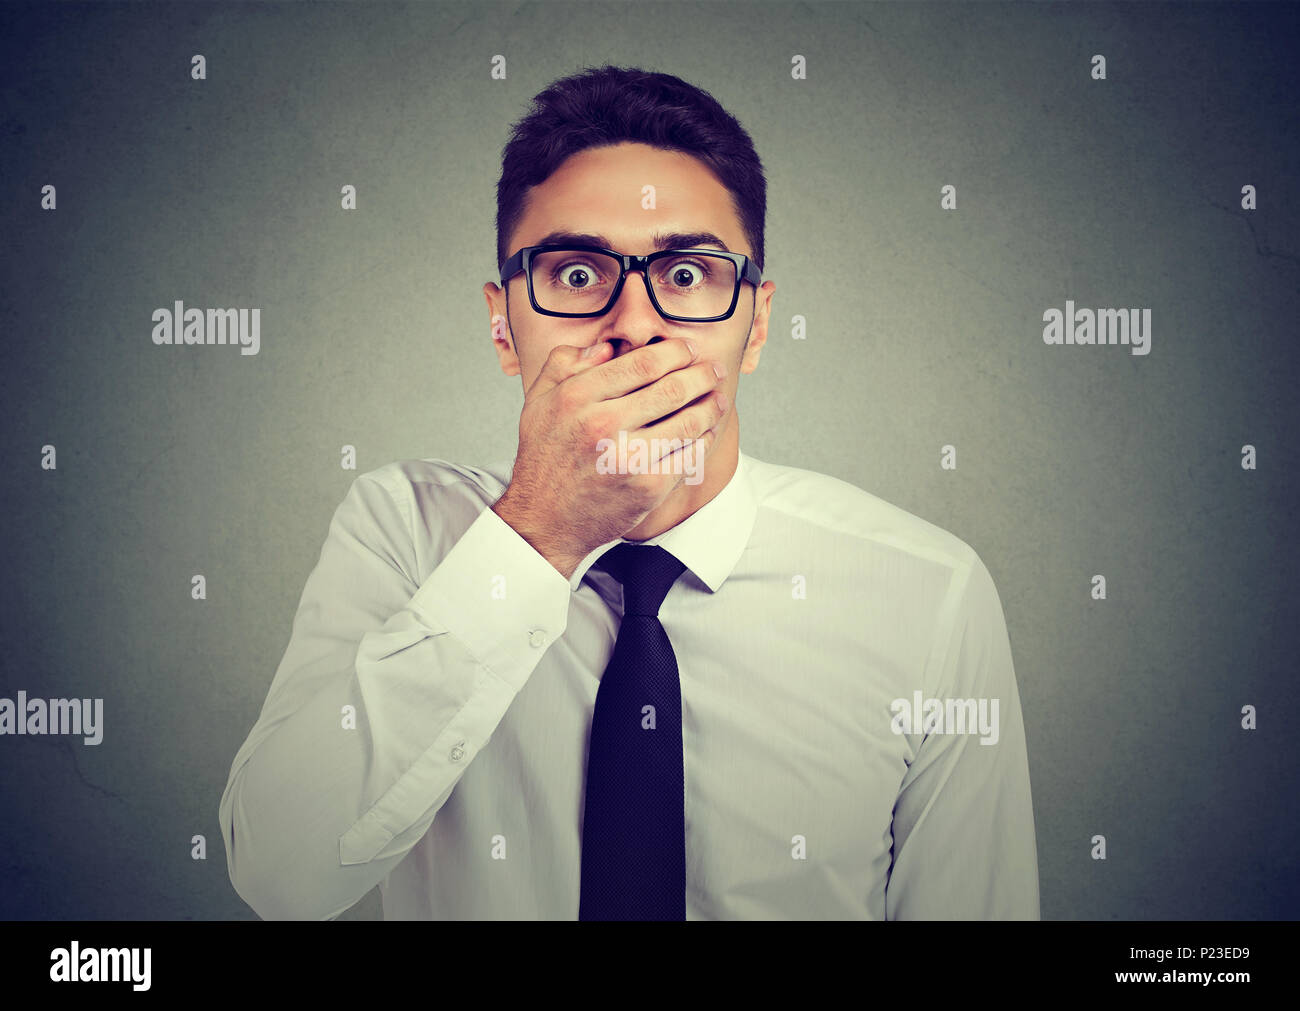 Shocked man covering his mouth with hand Stock Photo